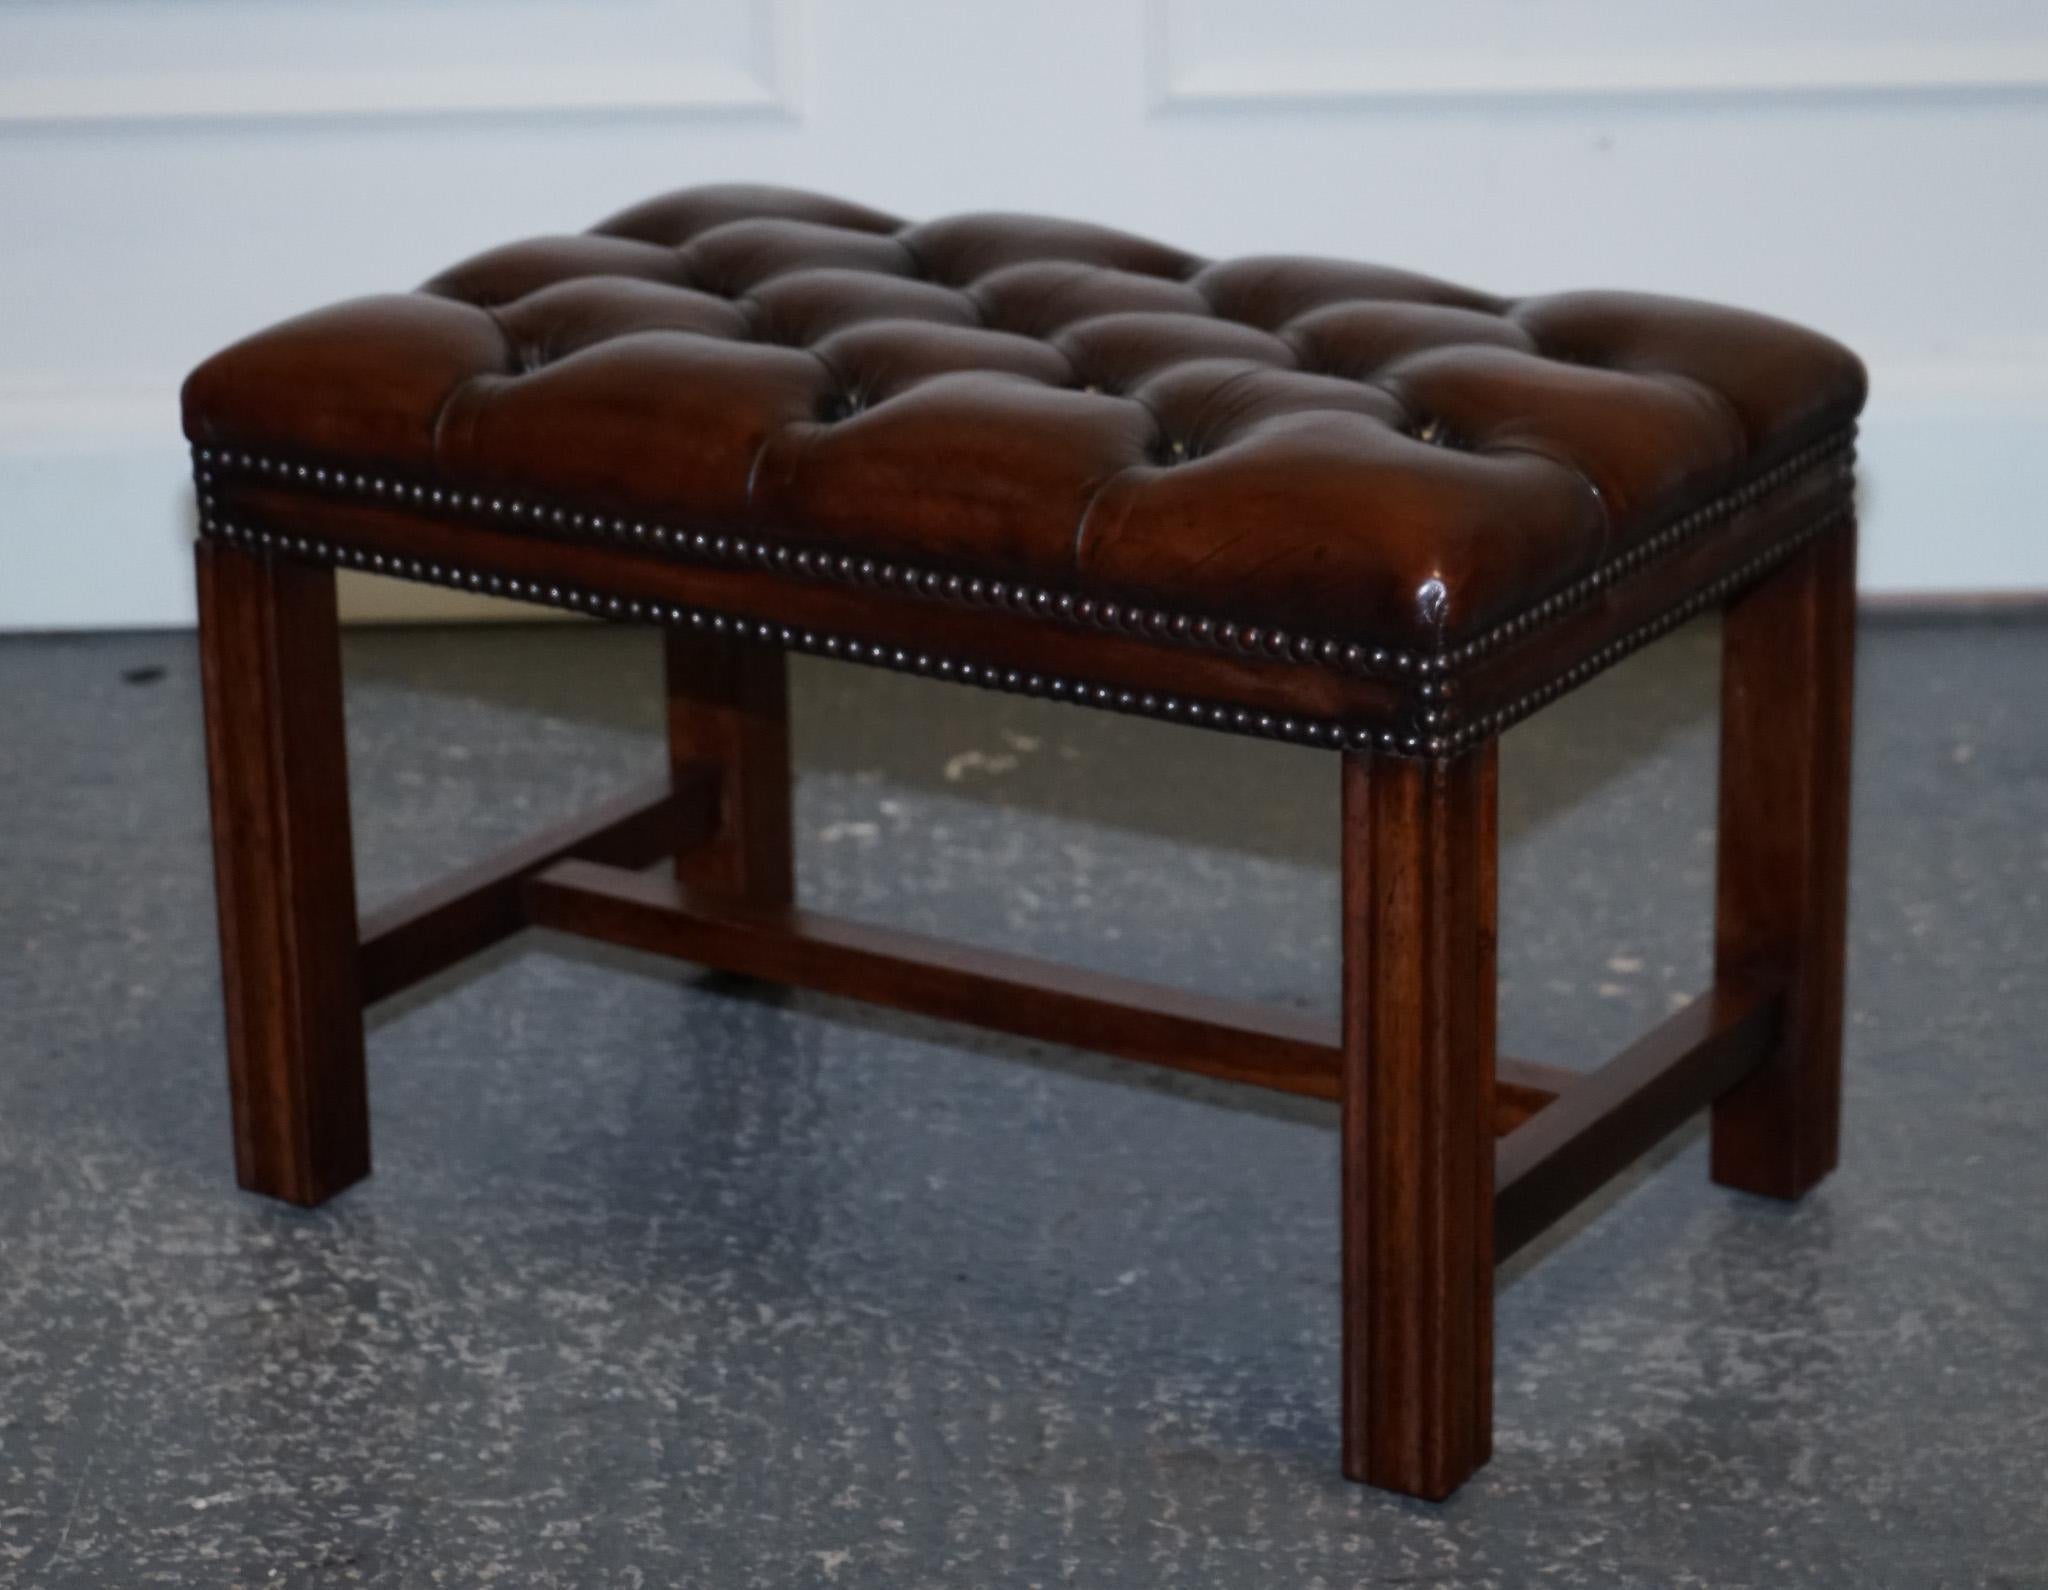 VINTAGE RESTORED CHESTERFiELD HANDDYED BROWN LEATHER TUFFED FOOTSTOOL im Angebot 1